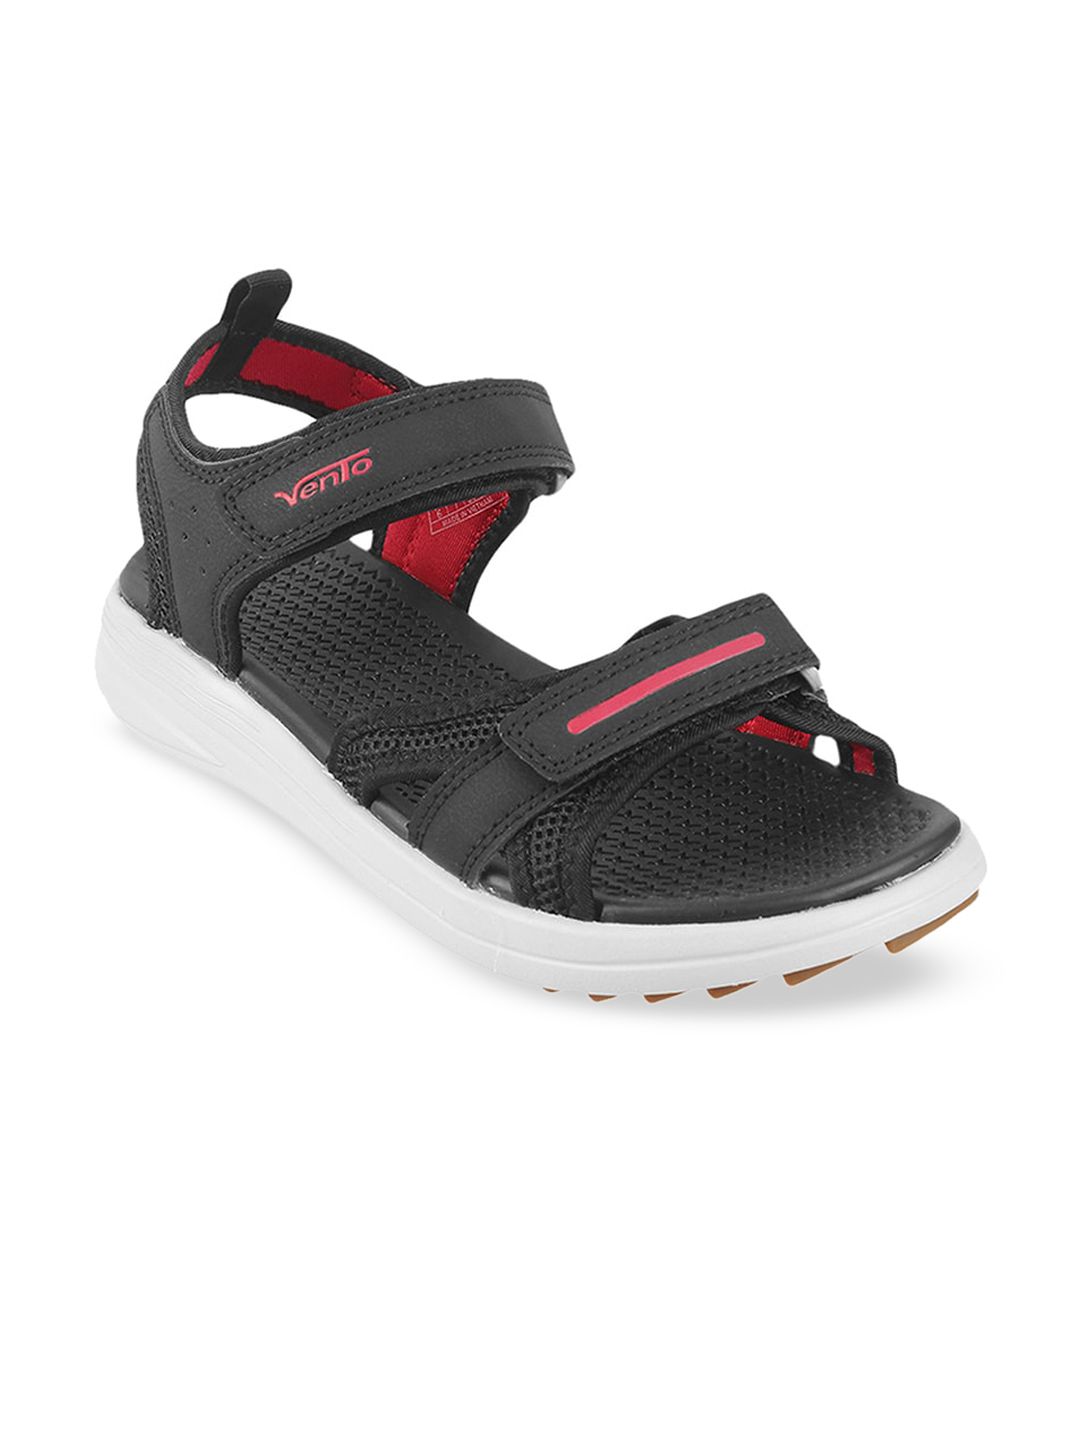 Vento Black & Pink Solid Sports Sandals Price in India